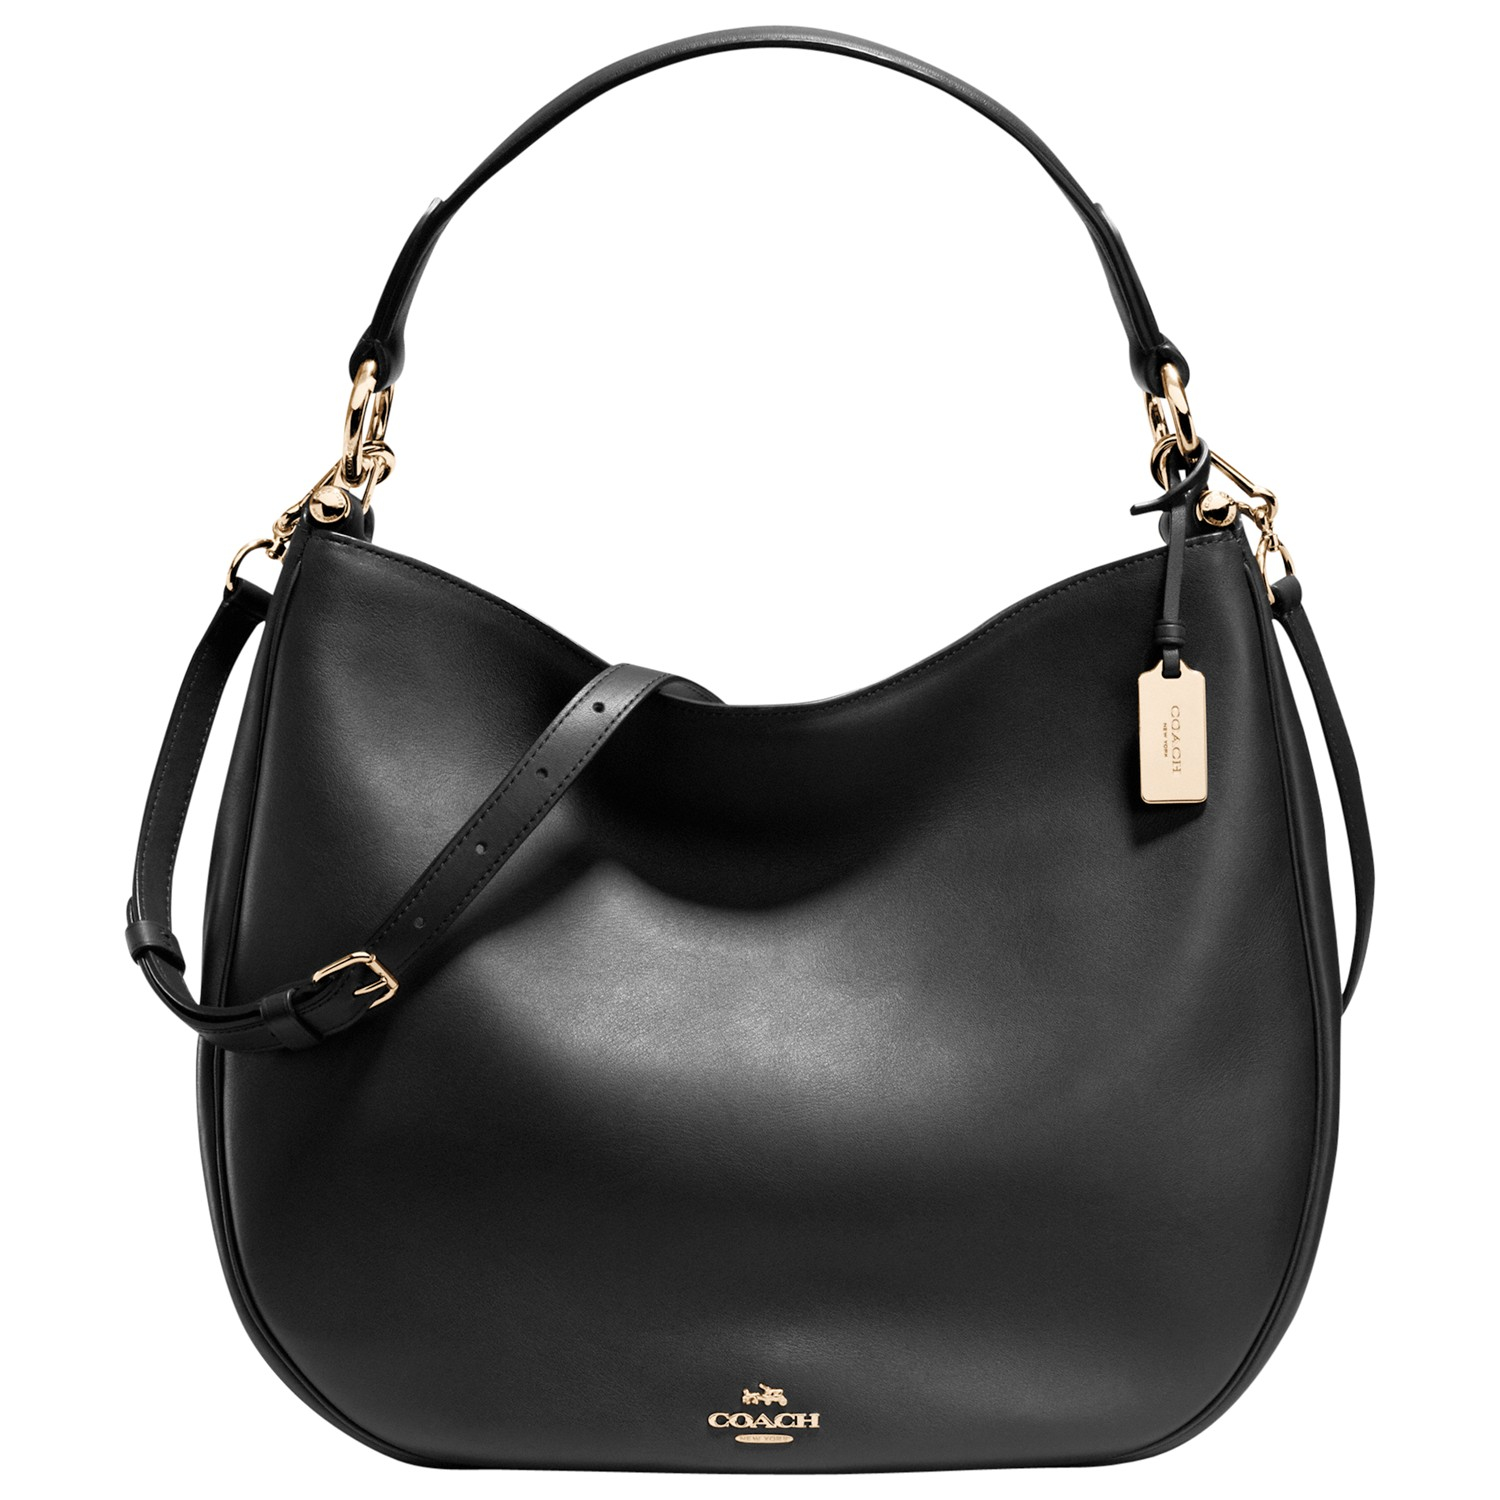  Coach  Nomad Leather Hobo Bag in Black Lyst